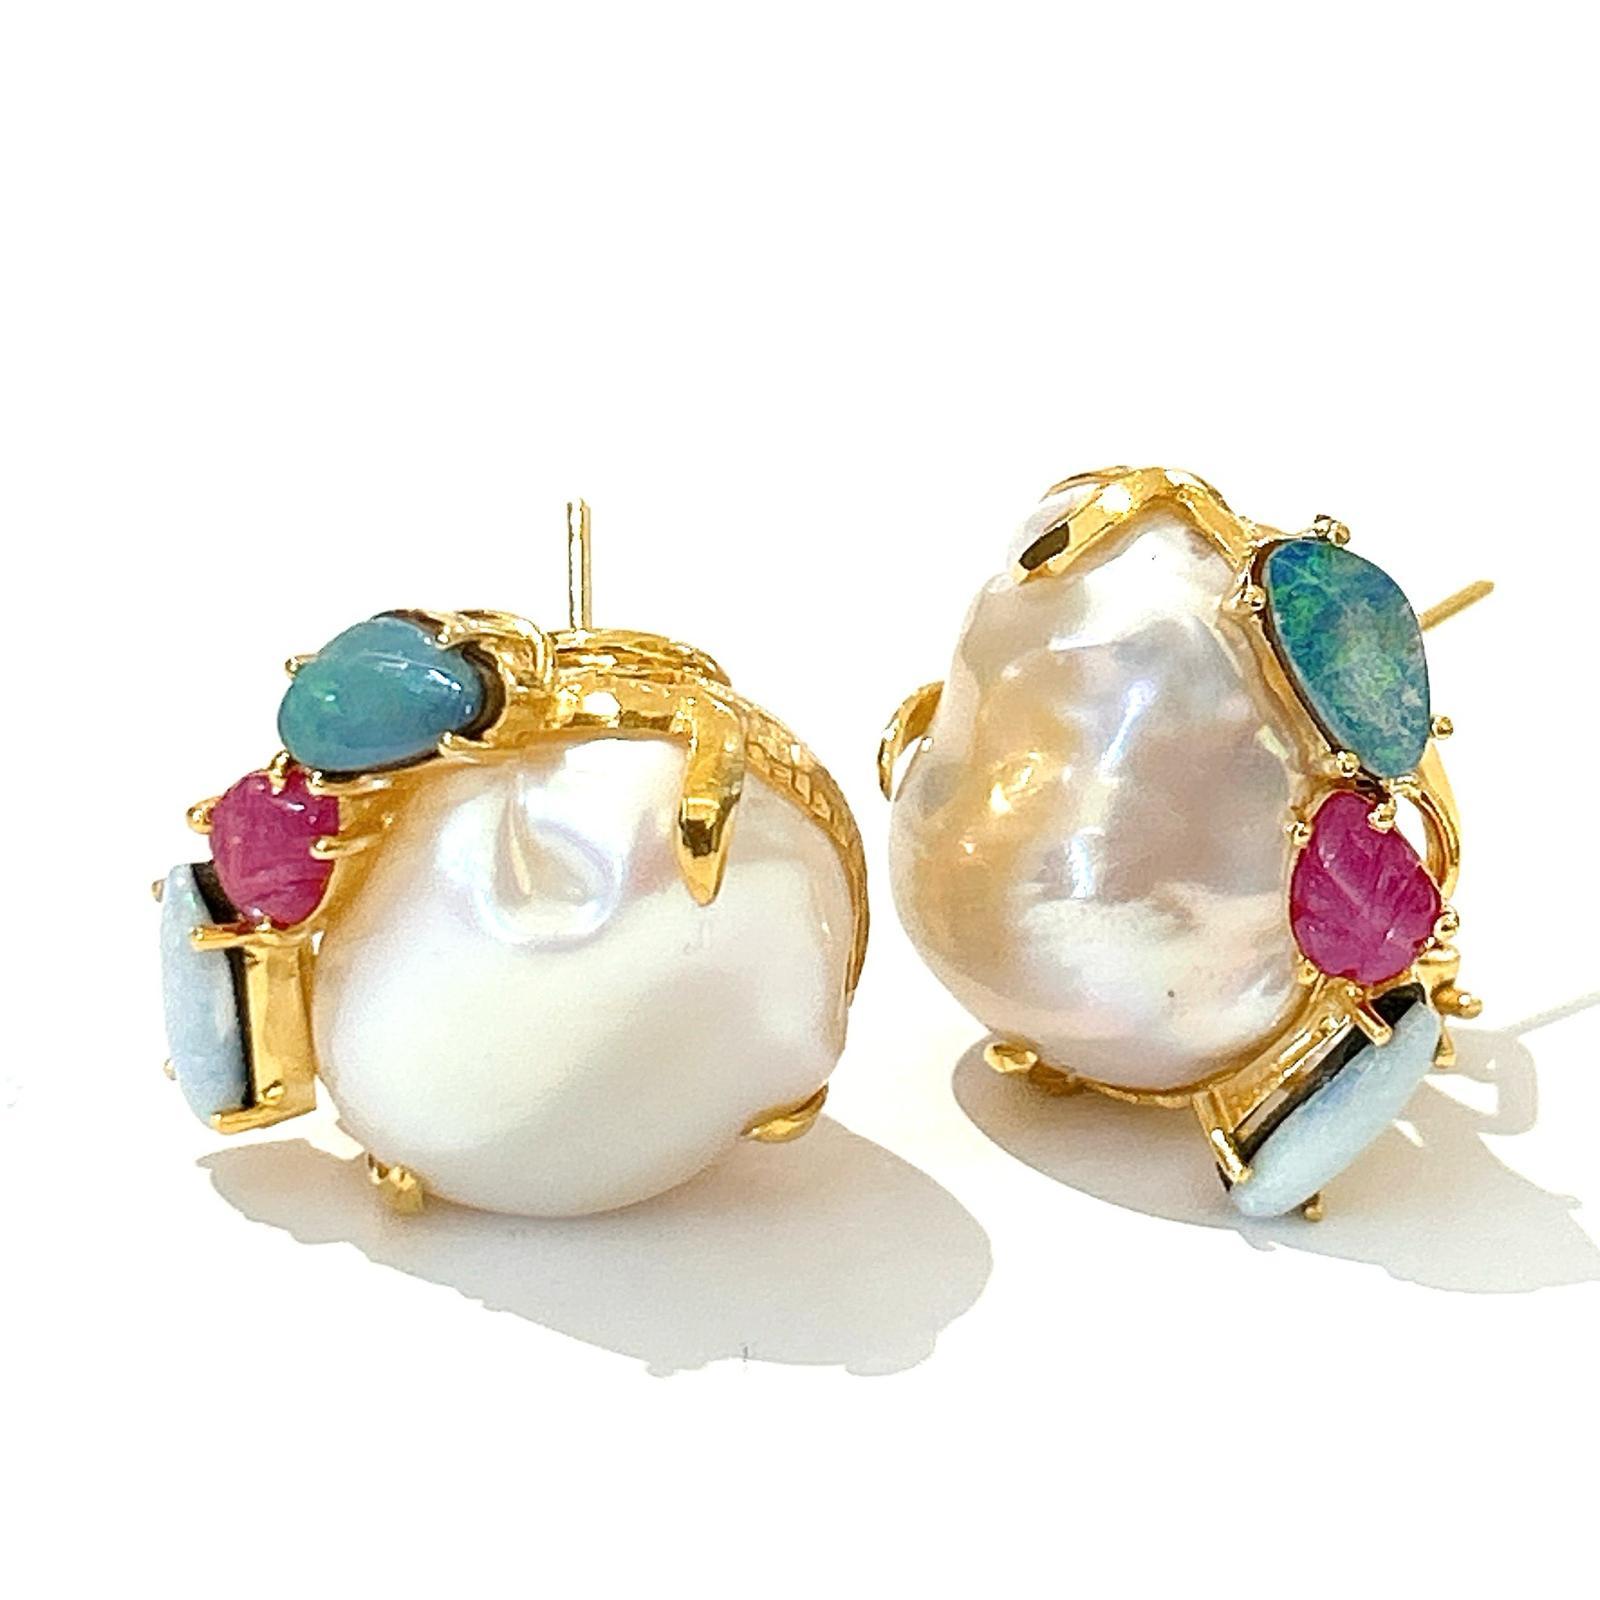 Bochic “Orient” Opal, Ruby & Multi Gem Earrings Set 18K Gold&Silver 

Natural Rubies - 4 carat  
Natural Blue Opal- 2.50 carat 
South Sea white Pearl with Pink Tone

The earrings from the 